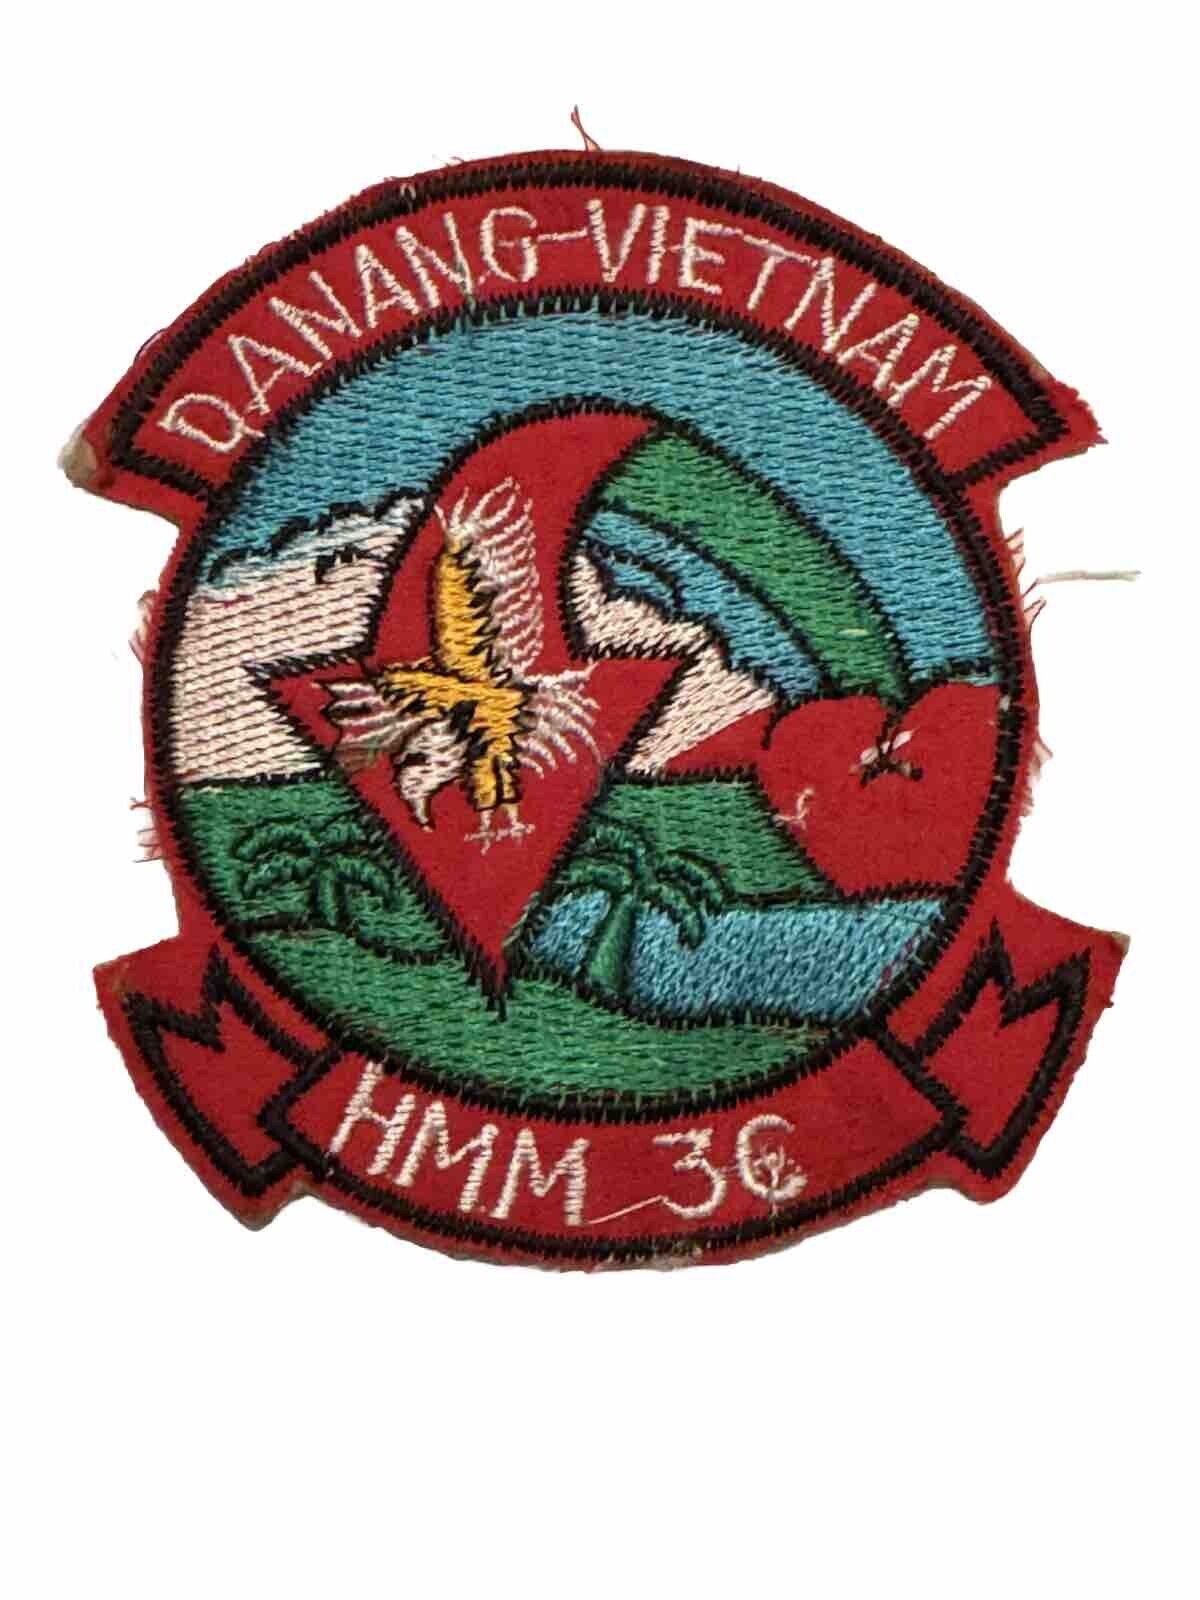 USMC Patch HMM 364 Danang Vietnam Embroidered Military Badge Insignia Marines